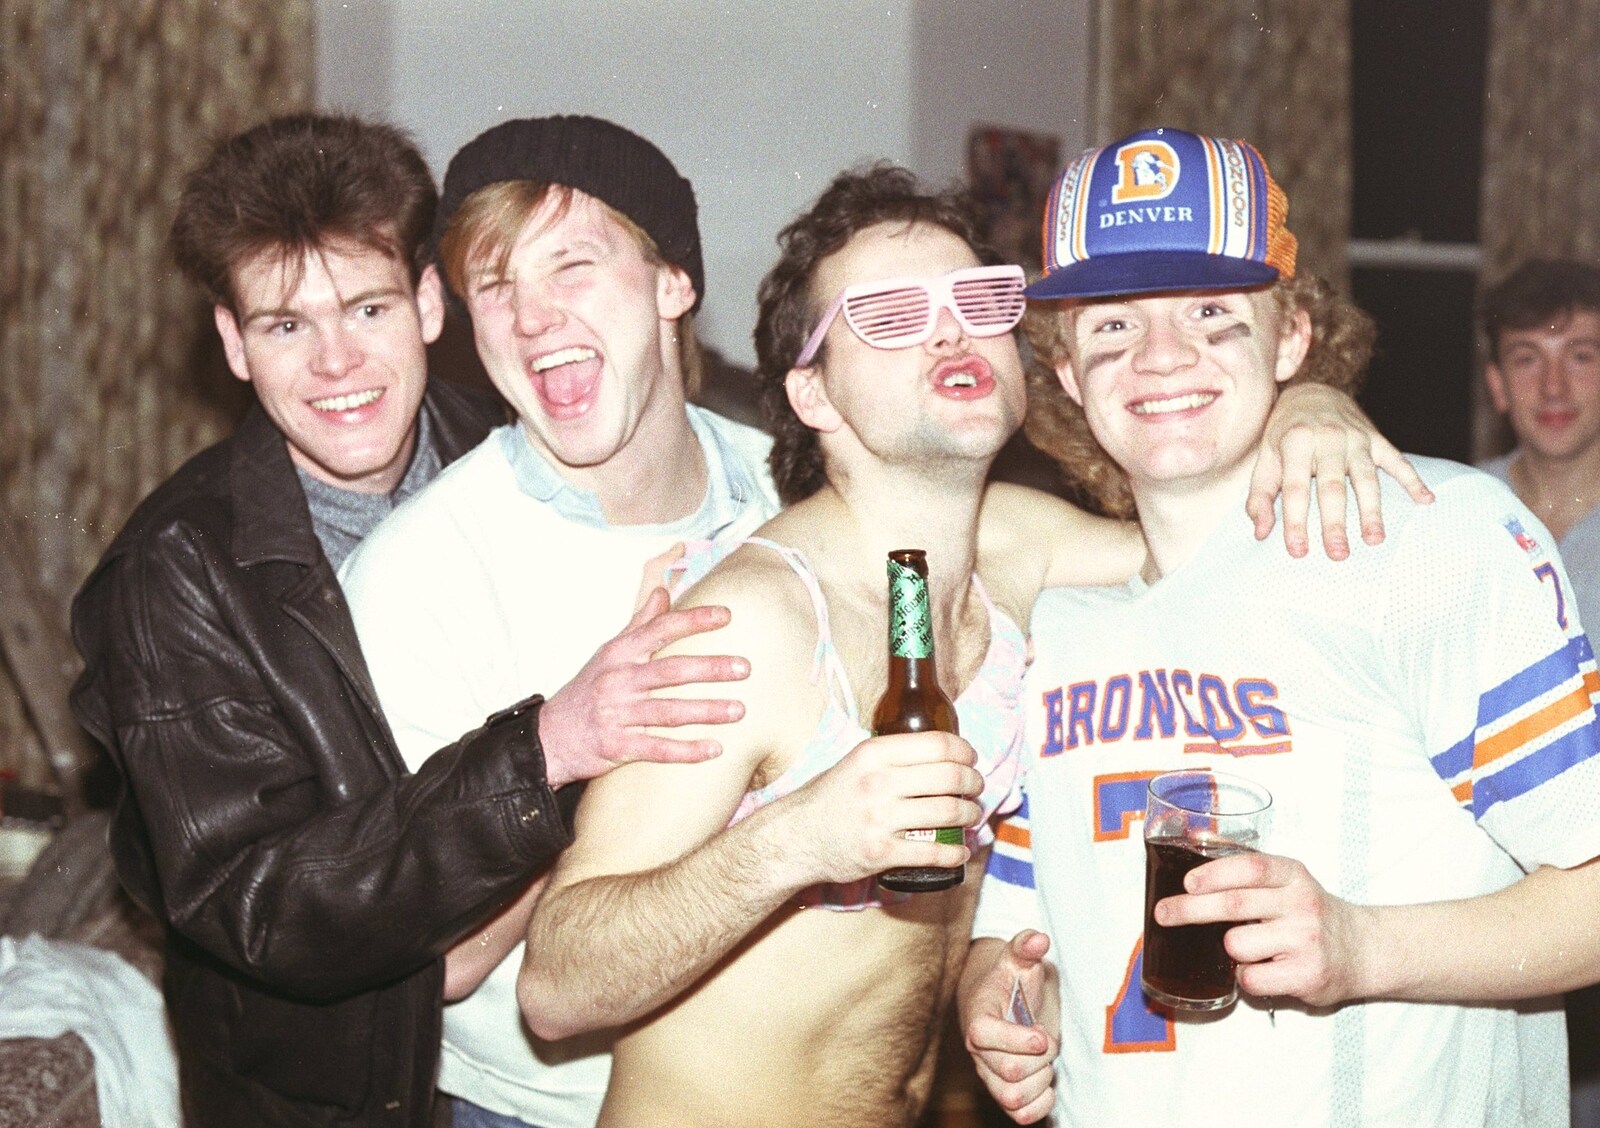 Ian Dunwoody with no shirt and funky shades from Uni: Simon Read's Party, North Road East, Plymouth - 10th October 1986